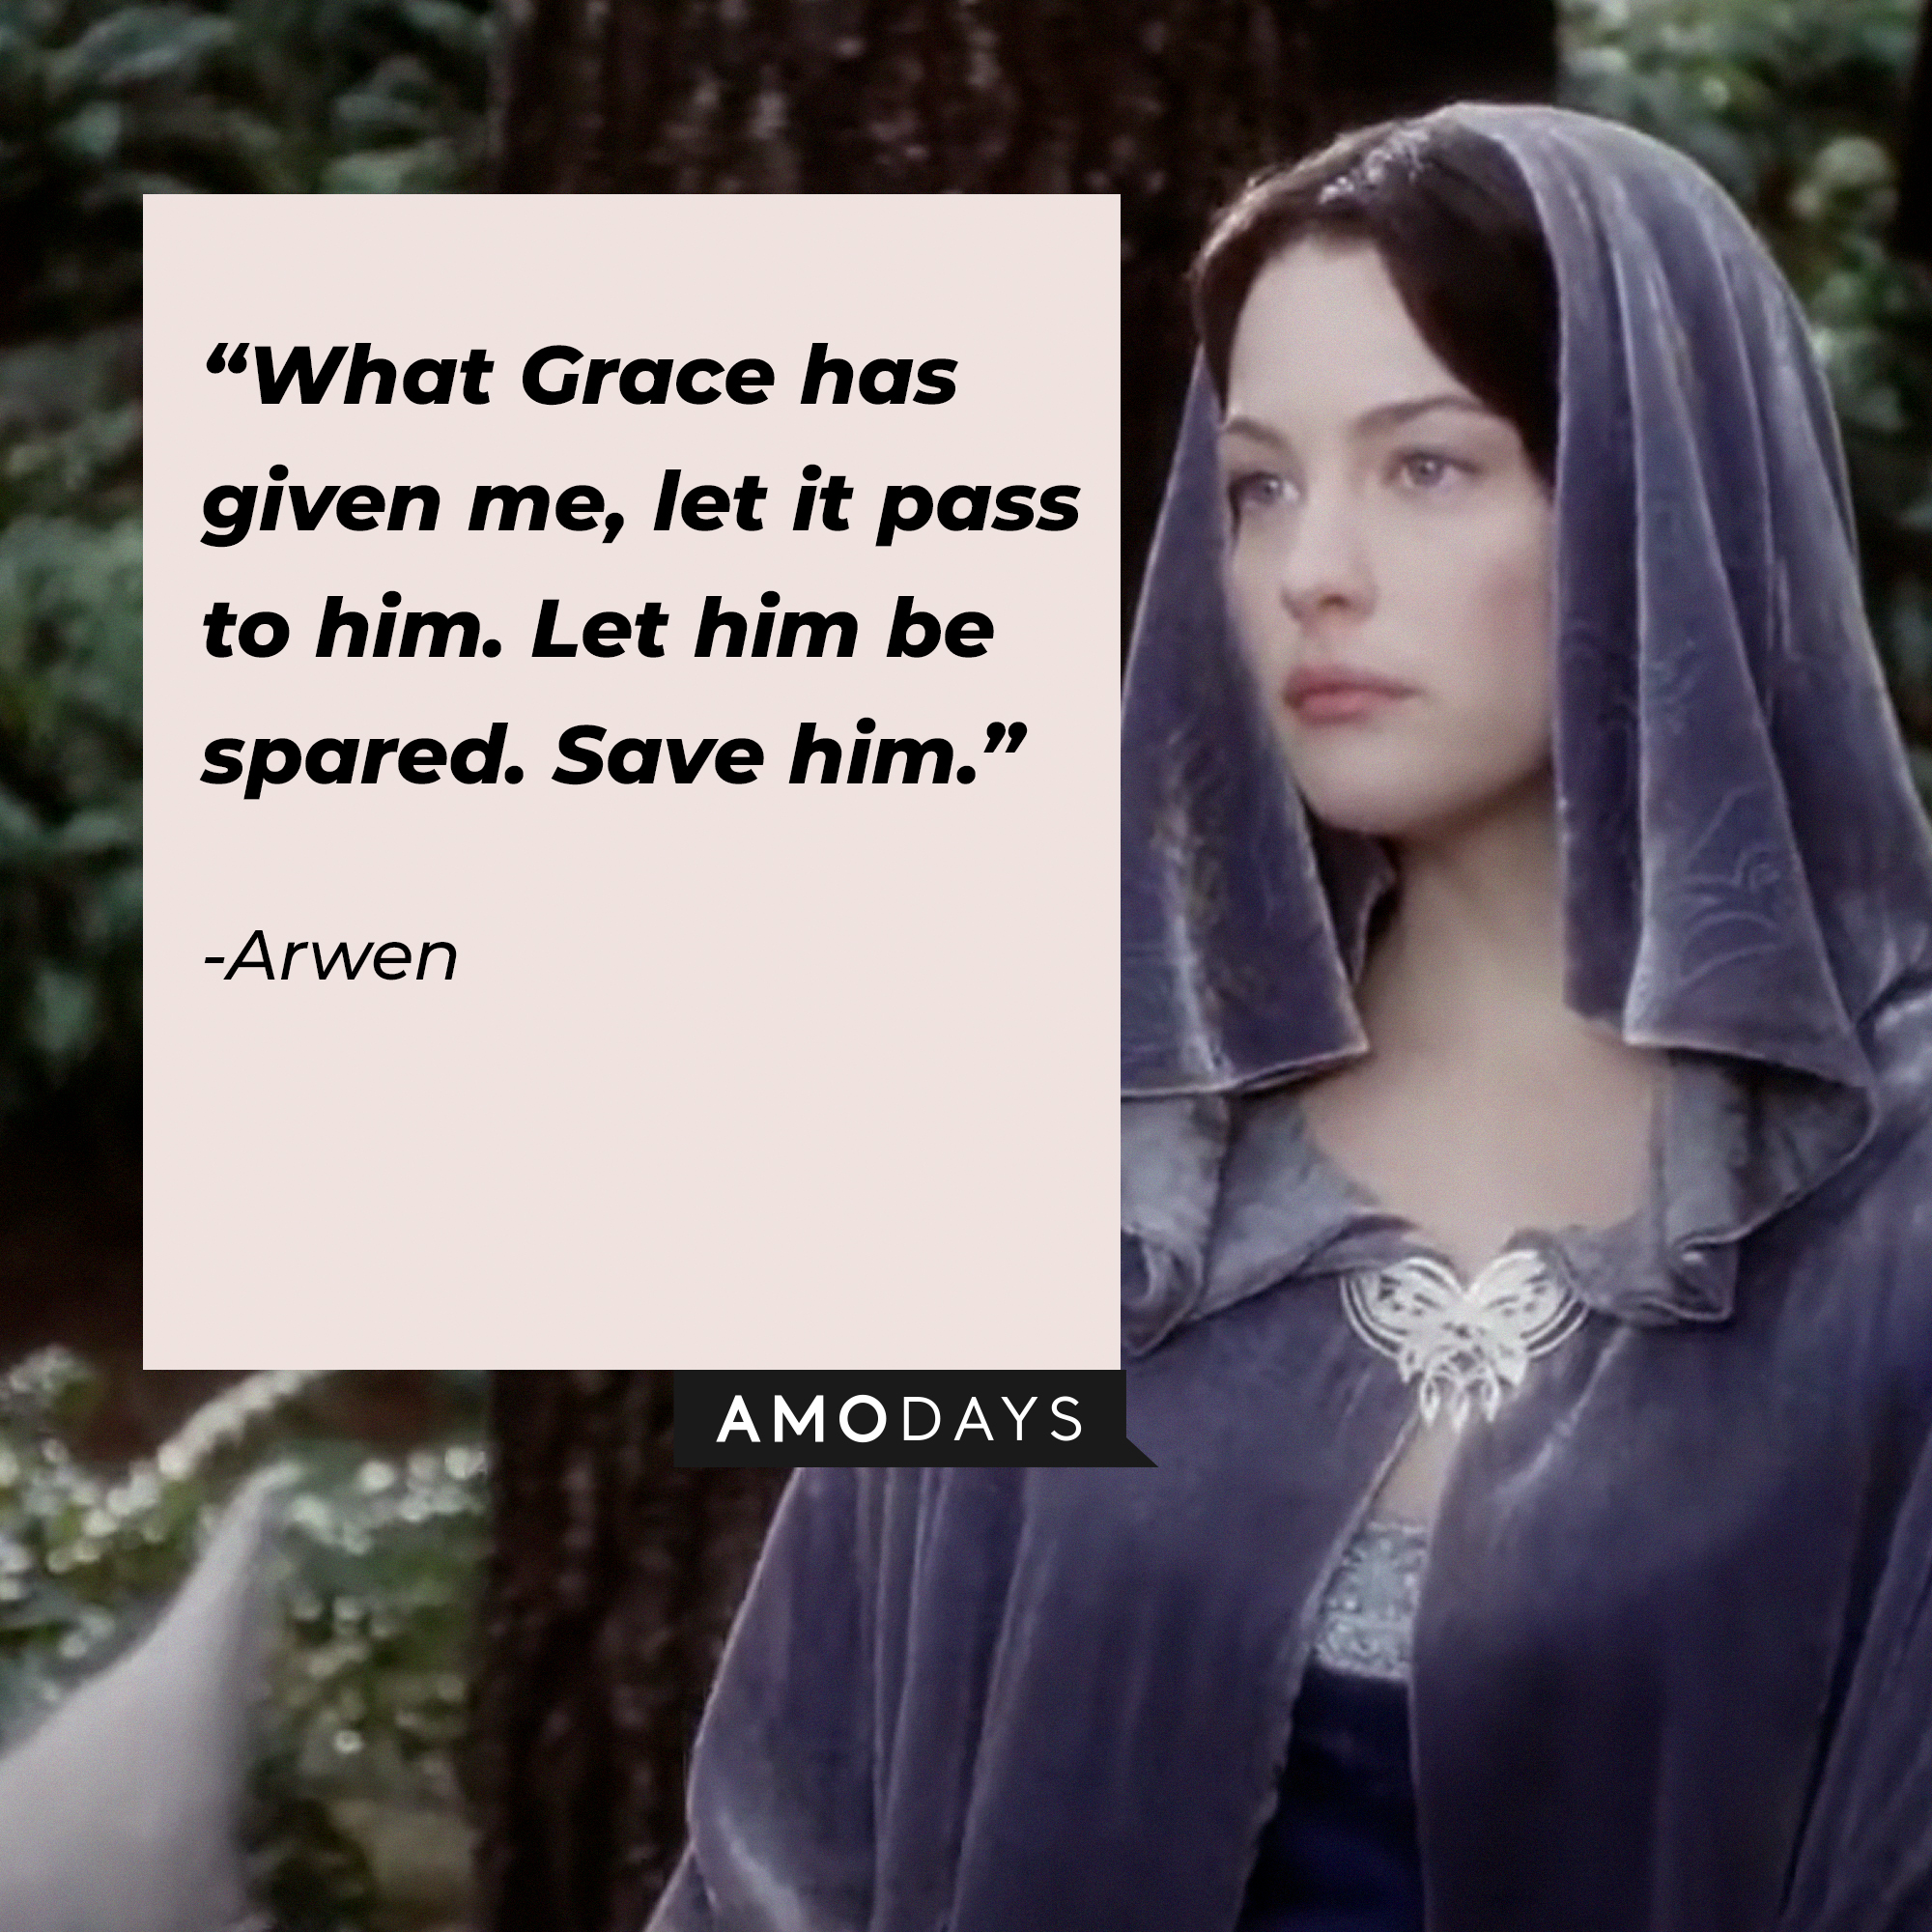 Arwen's quote : “What Grace has given me, let it pass to him. Let him be spared. Save him.” | Source: facebook.com/lordoftheringstrilogy